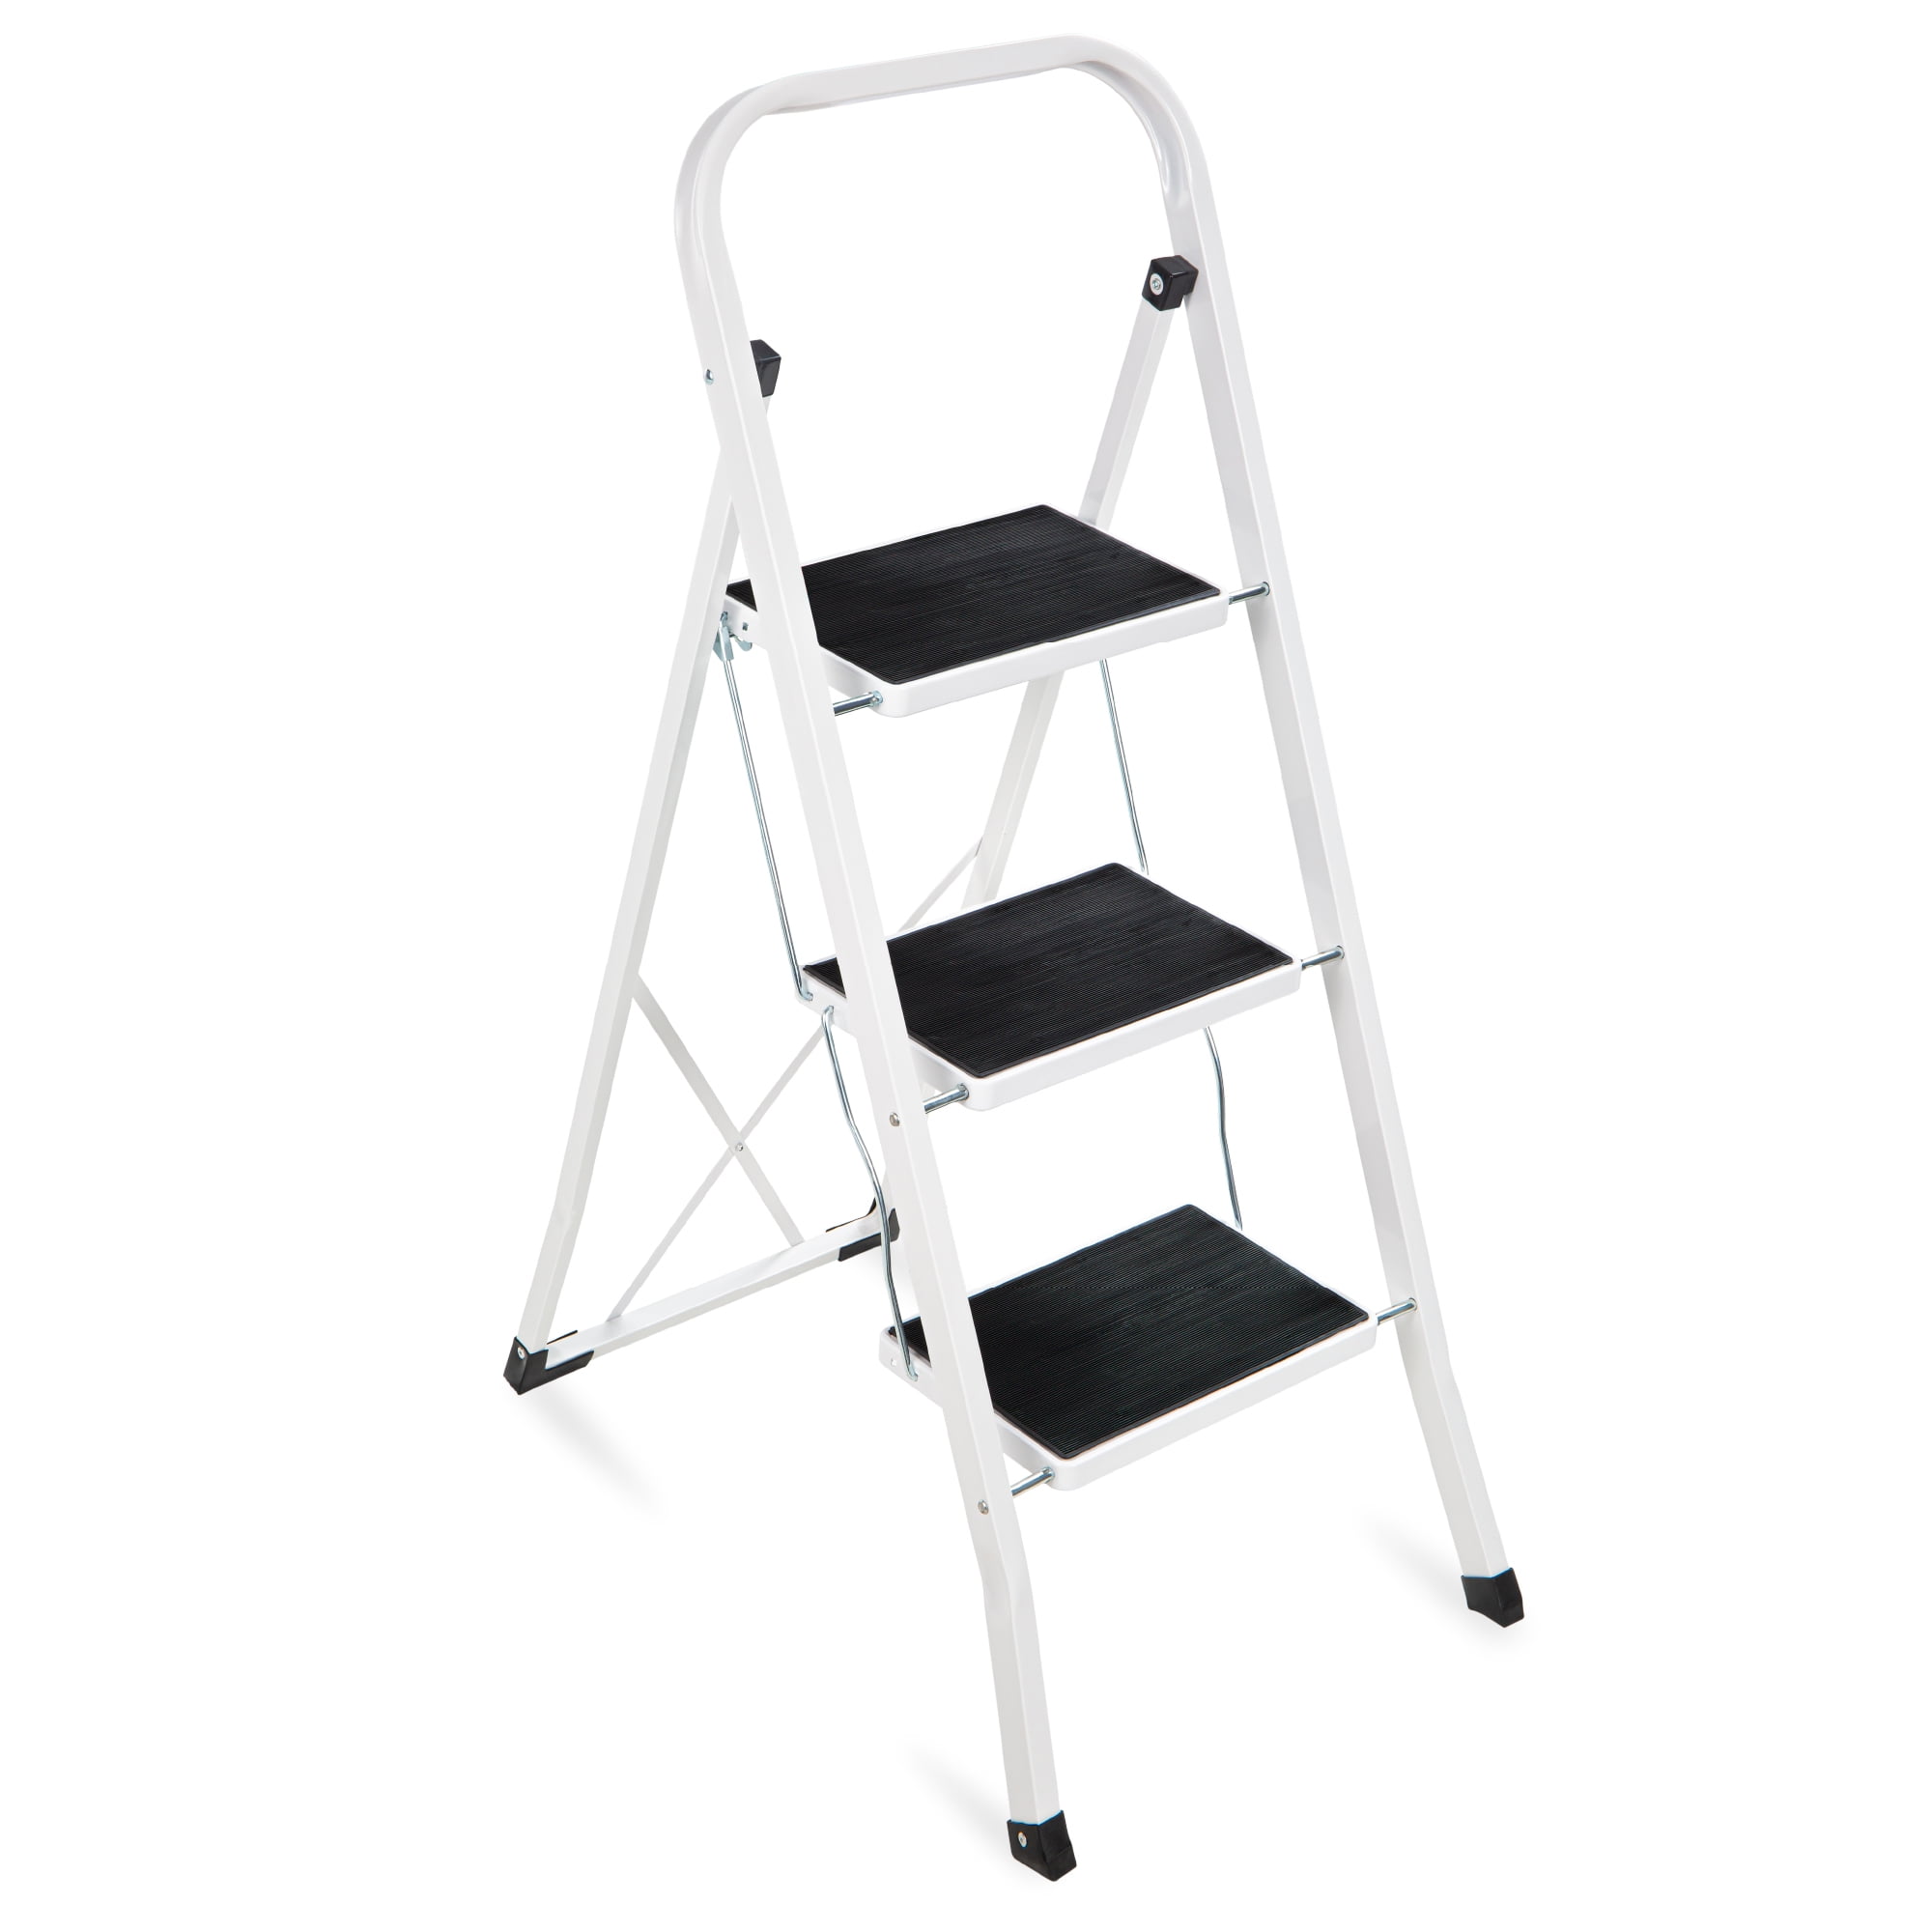 BAOYOUNI 5 Step Ladder Folding Step Stool Heavy Duty Stepladders with Safety Handle and Anti-Slip Wide Pedal Multi-Purpose Household Tool for Home Office Garage